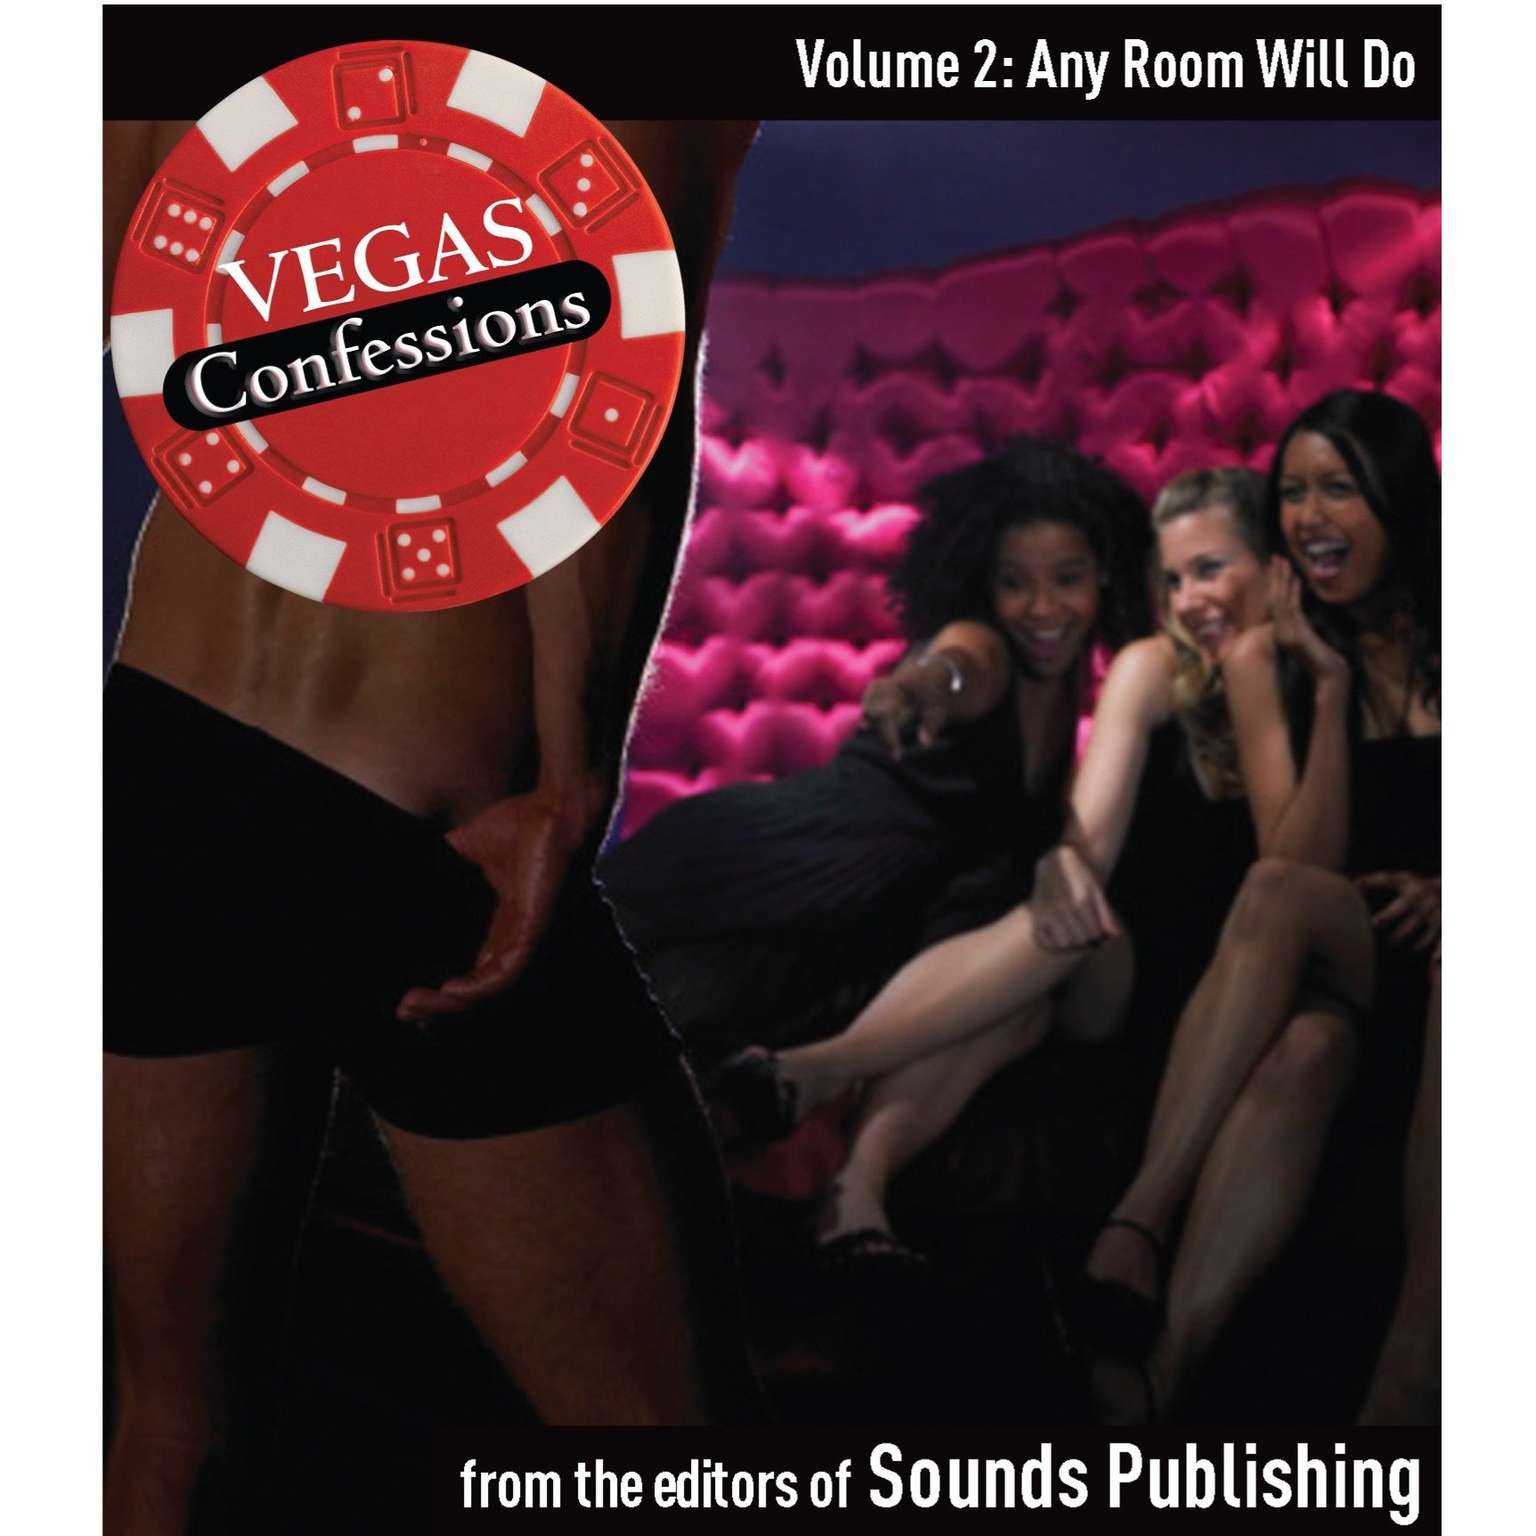 Vegas Confessions 2: Any Room Will Do Audiobook, by The Editors of Sounds Publishing